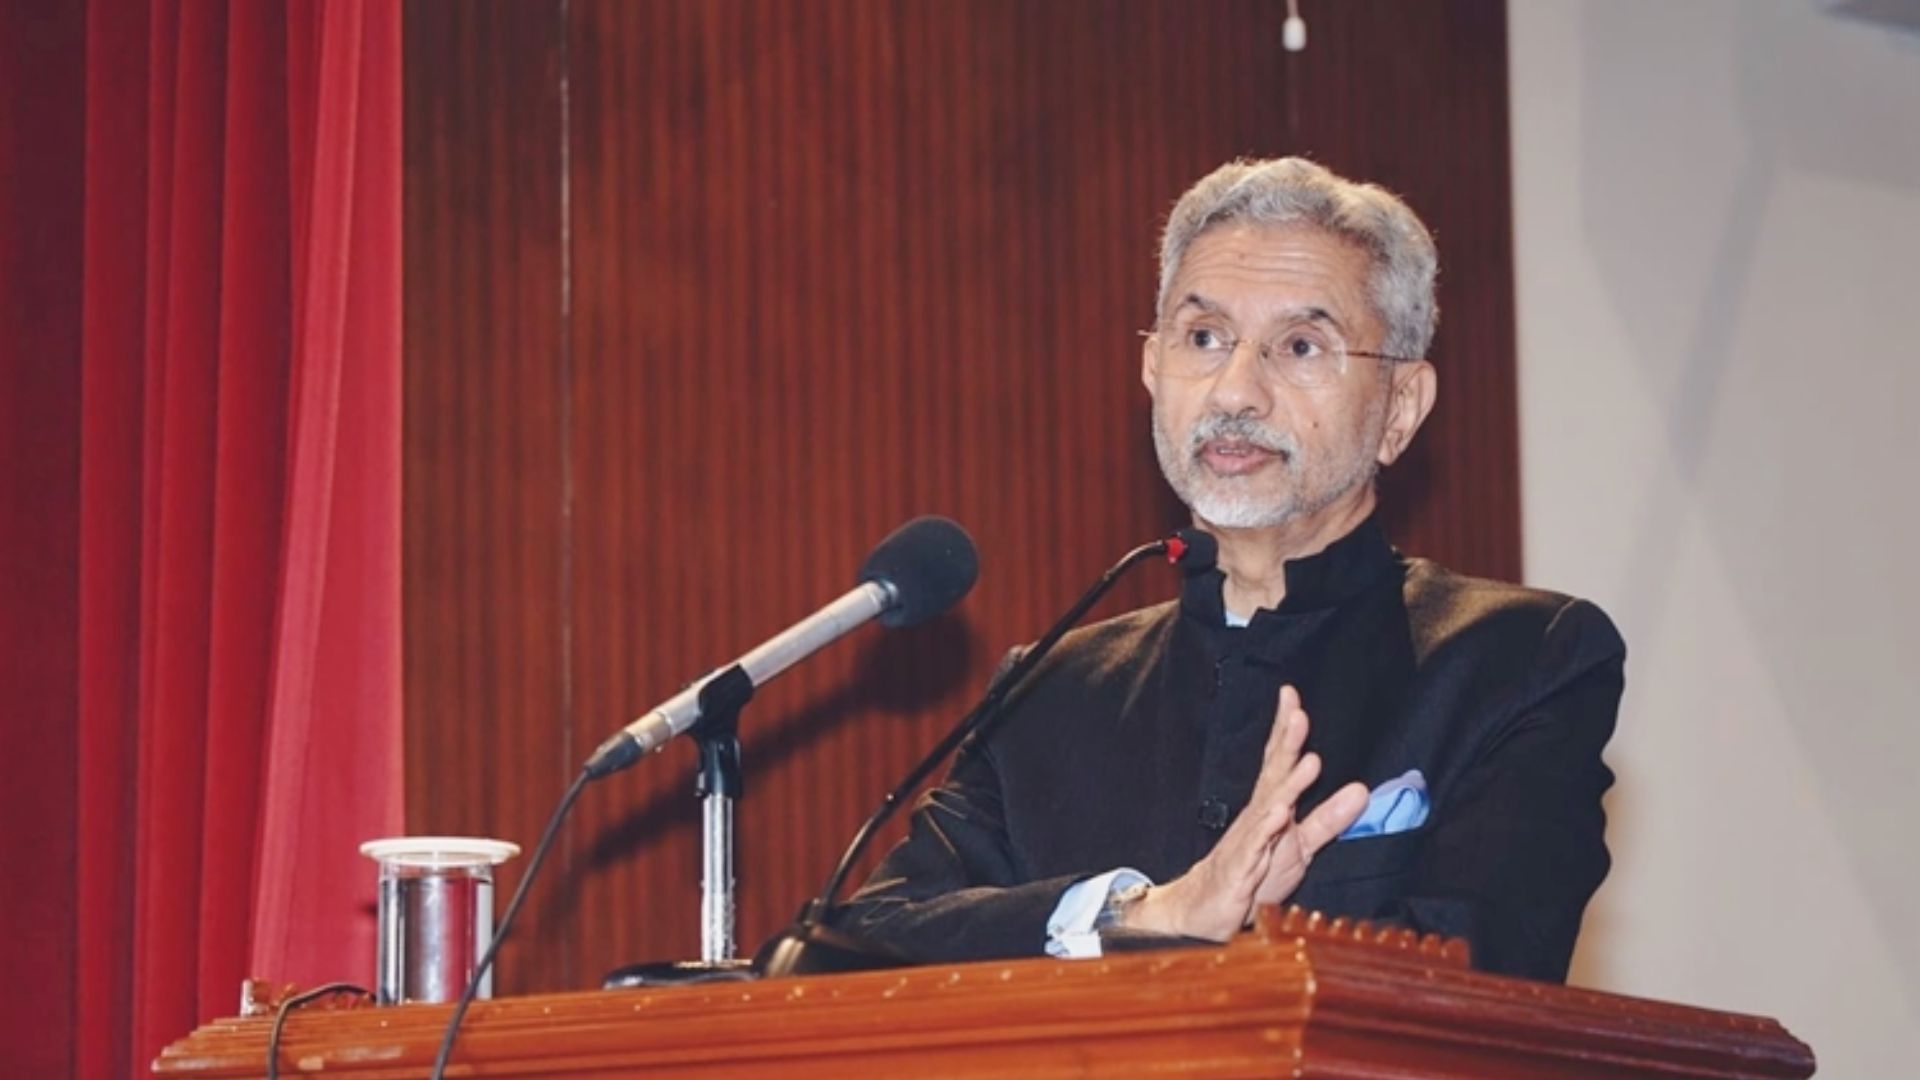 EAM Jaishankar Leads Inaugural Session at 7th Indian Ocean Conference